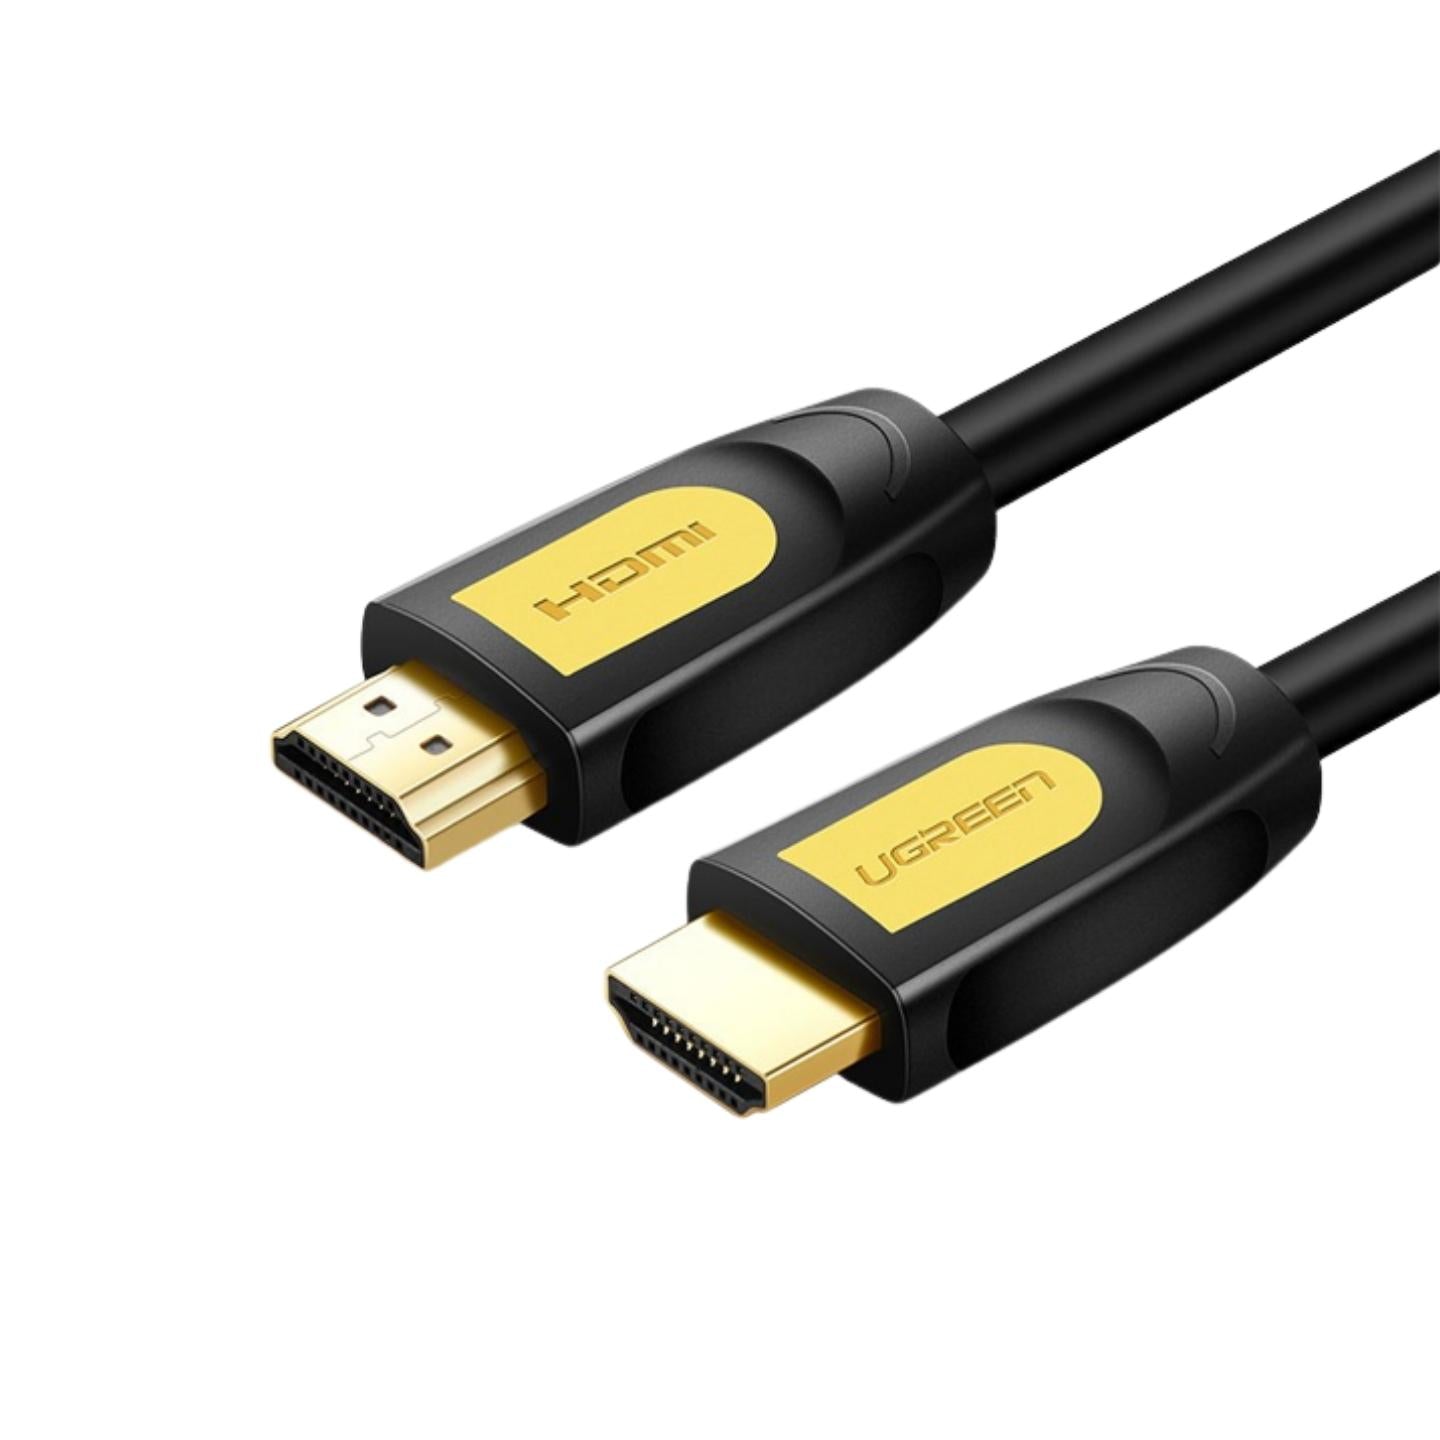 HDMI cable 3m 1080p version 1.4 heavy duty, male to male type A